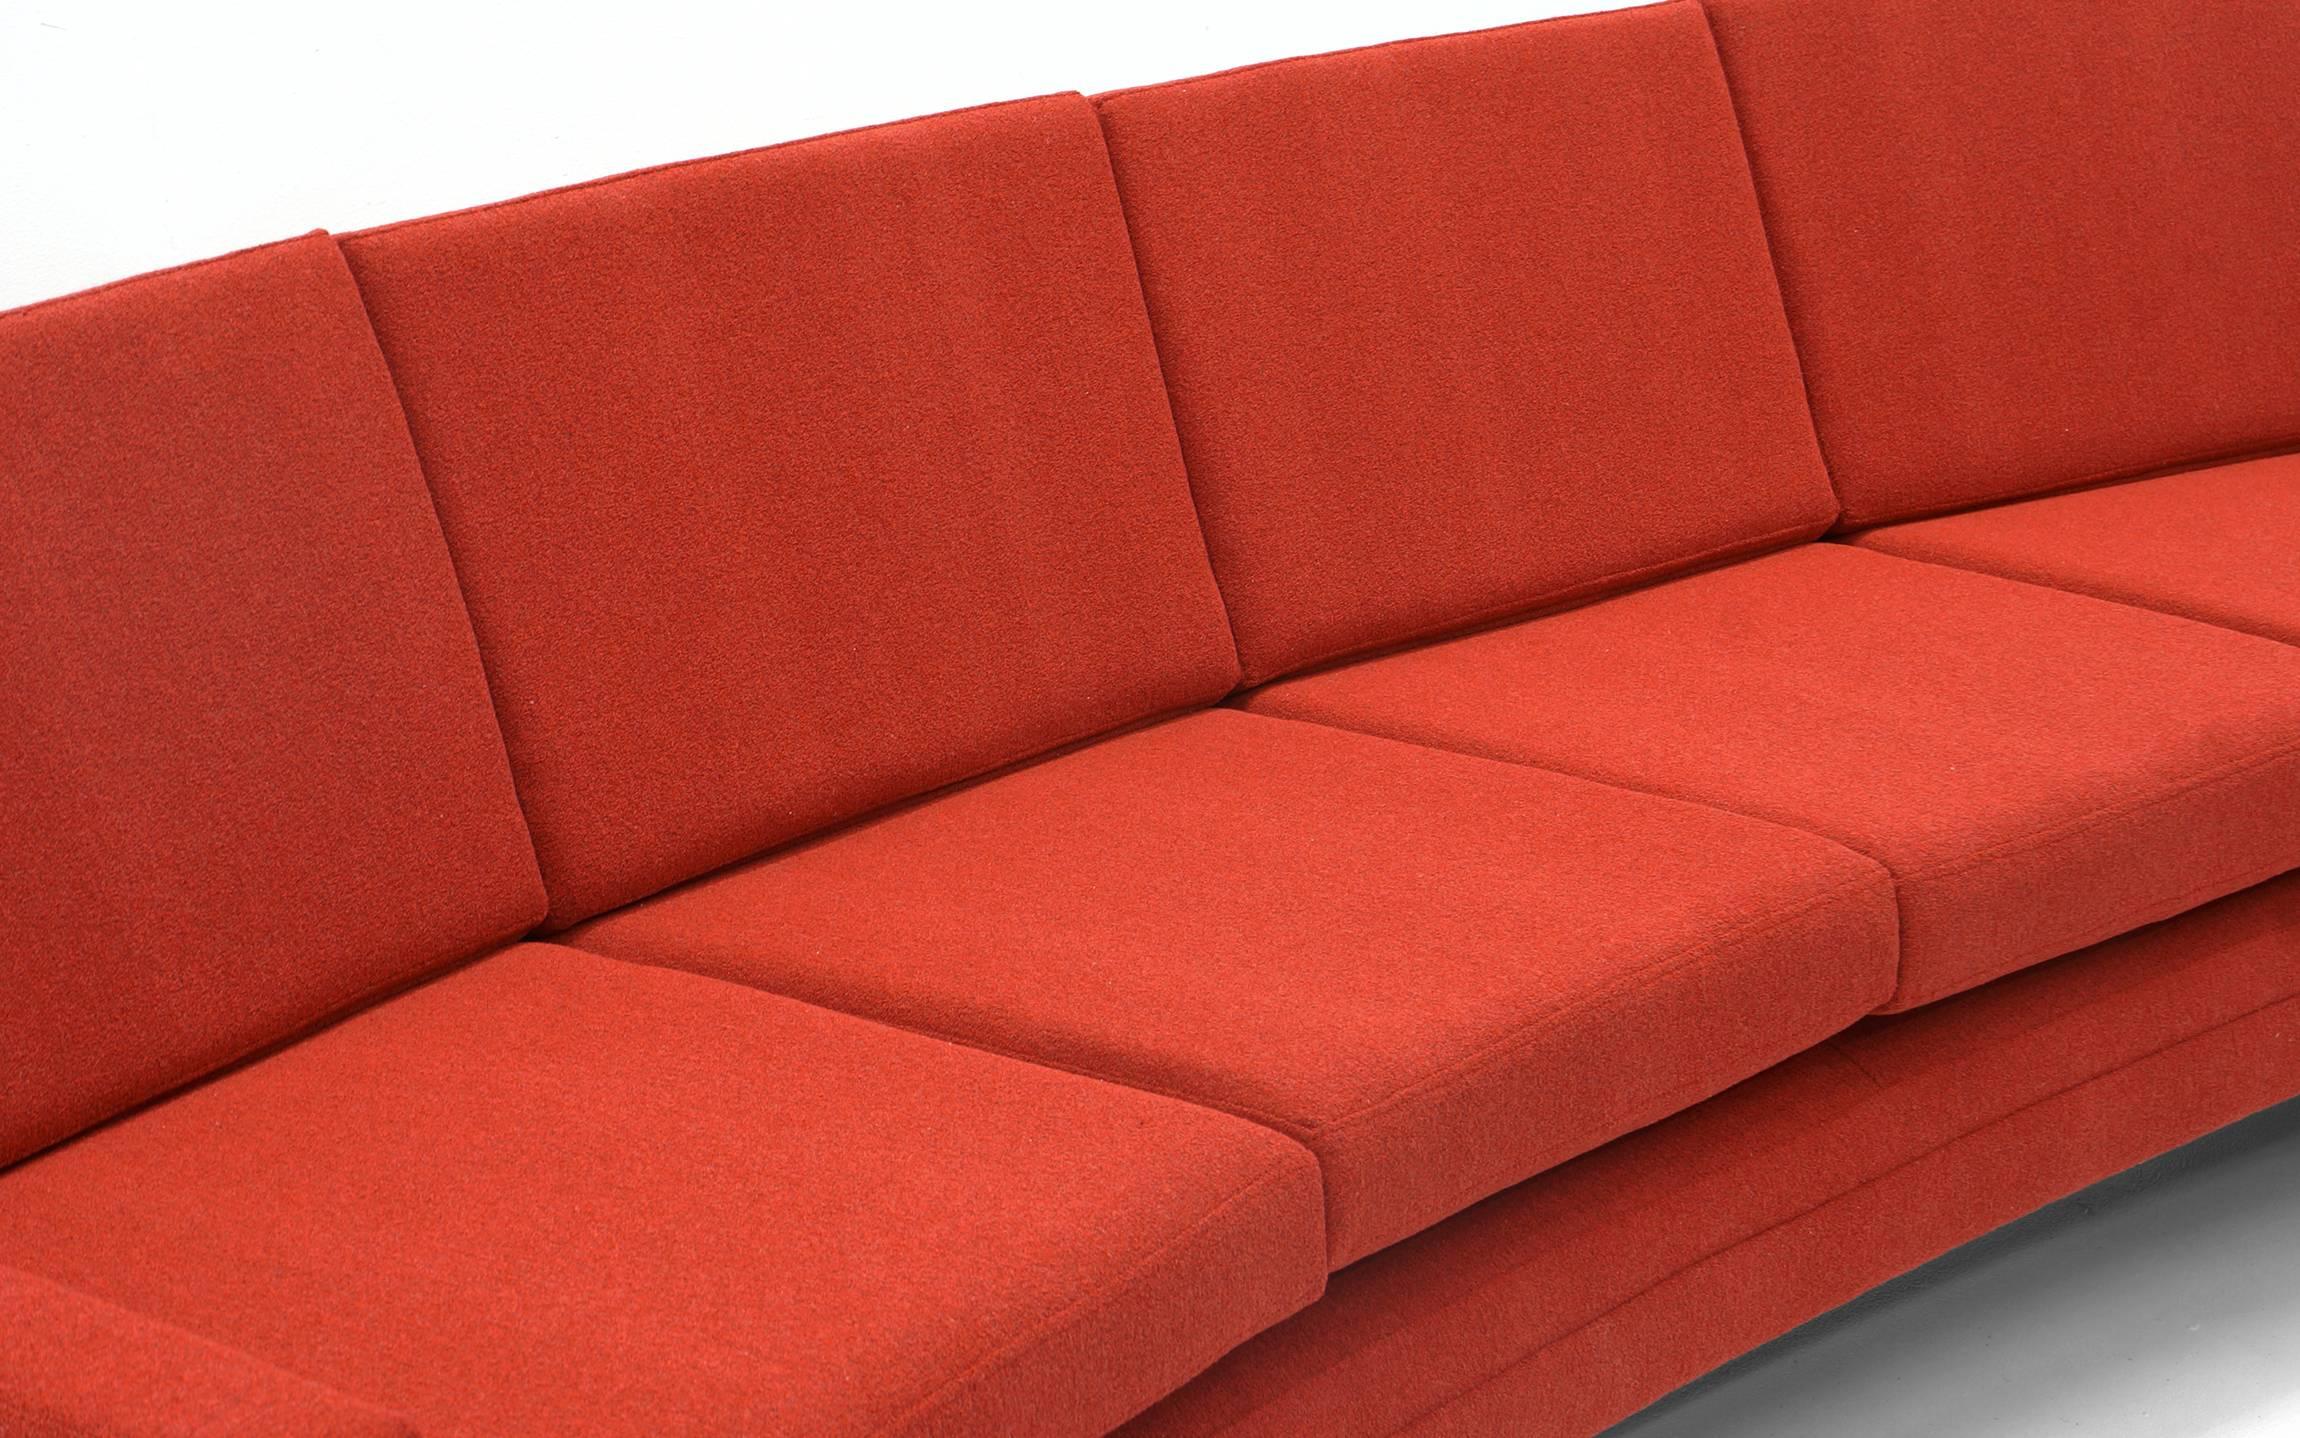 Norwegian Curved Sofa by Frederick Kayser Restored Redone in Rich Red Knoll Cuddle Cloth